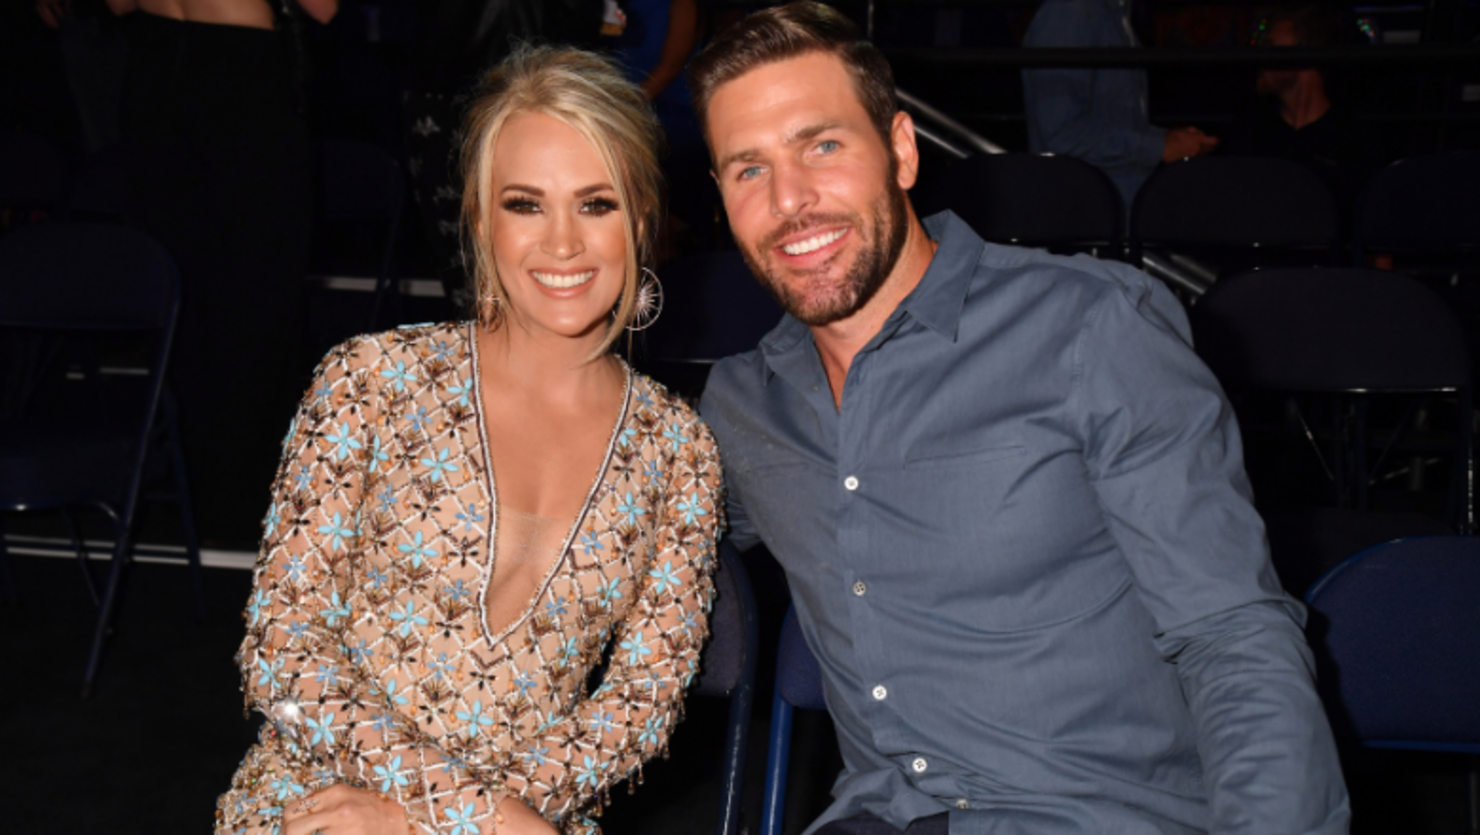 Carrie Underwood Says Valentine's Day Is Her 'Least Favorite Holiday'